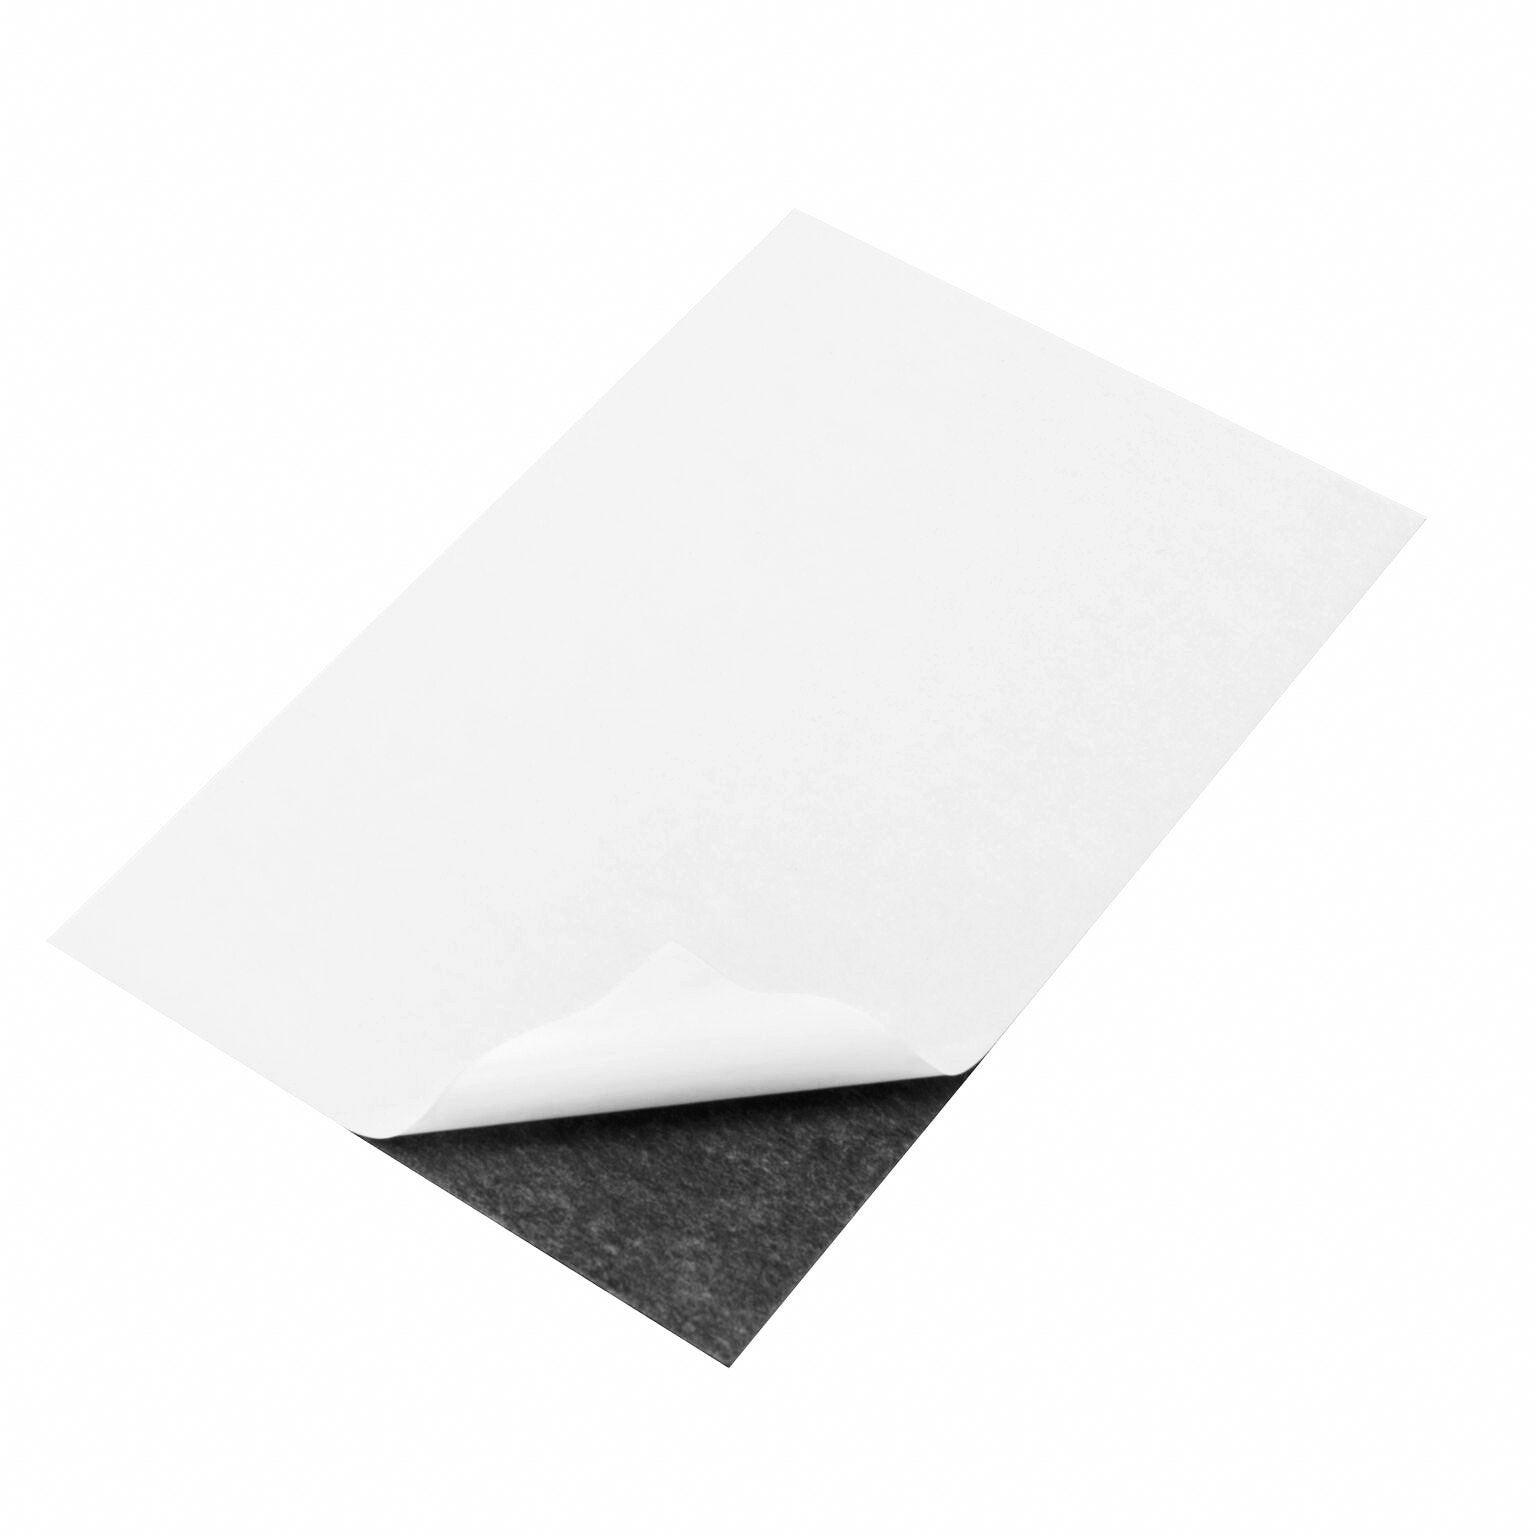 Strong Self Adhesive Magnetic Sheet 4X6 Flexible Magnetic Sheets